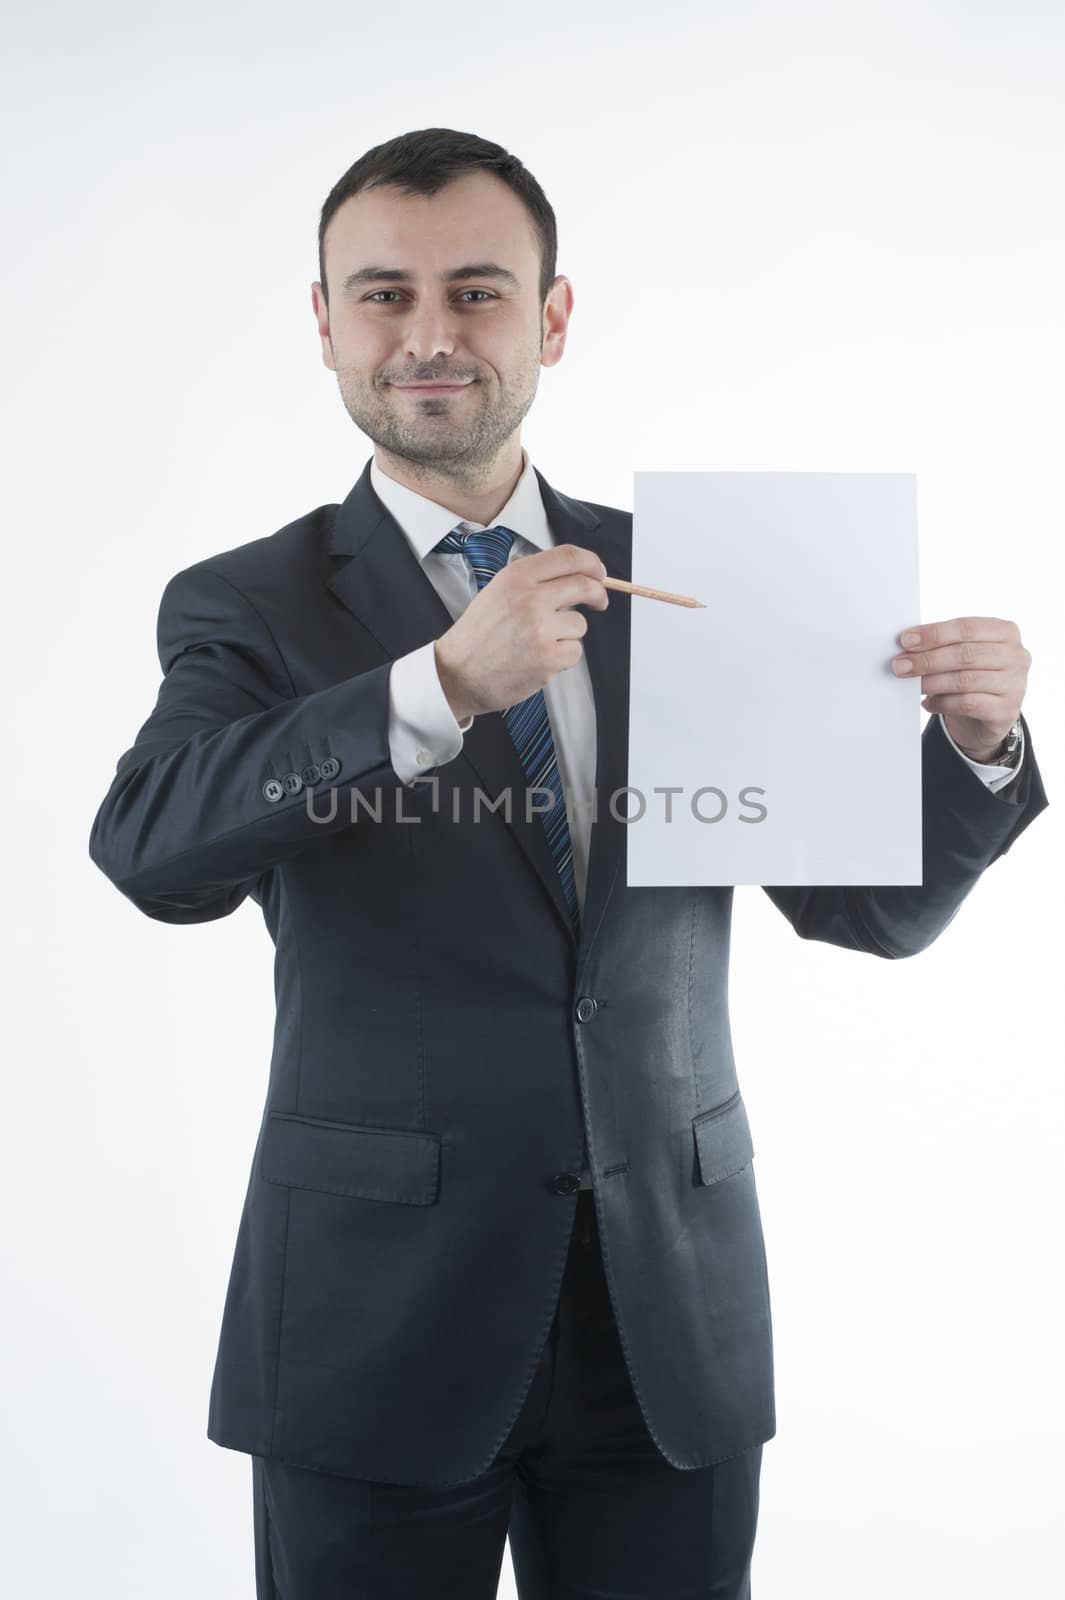 Businessman shows blank paper